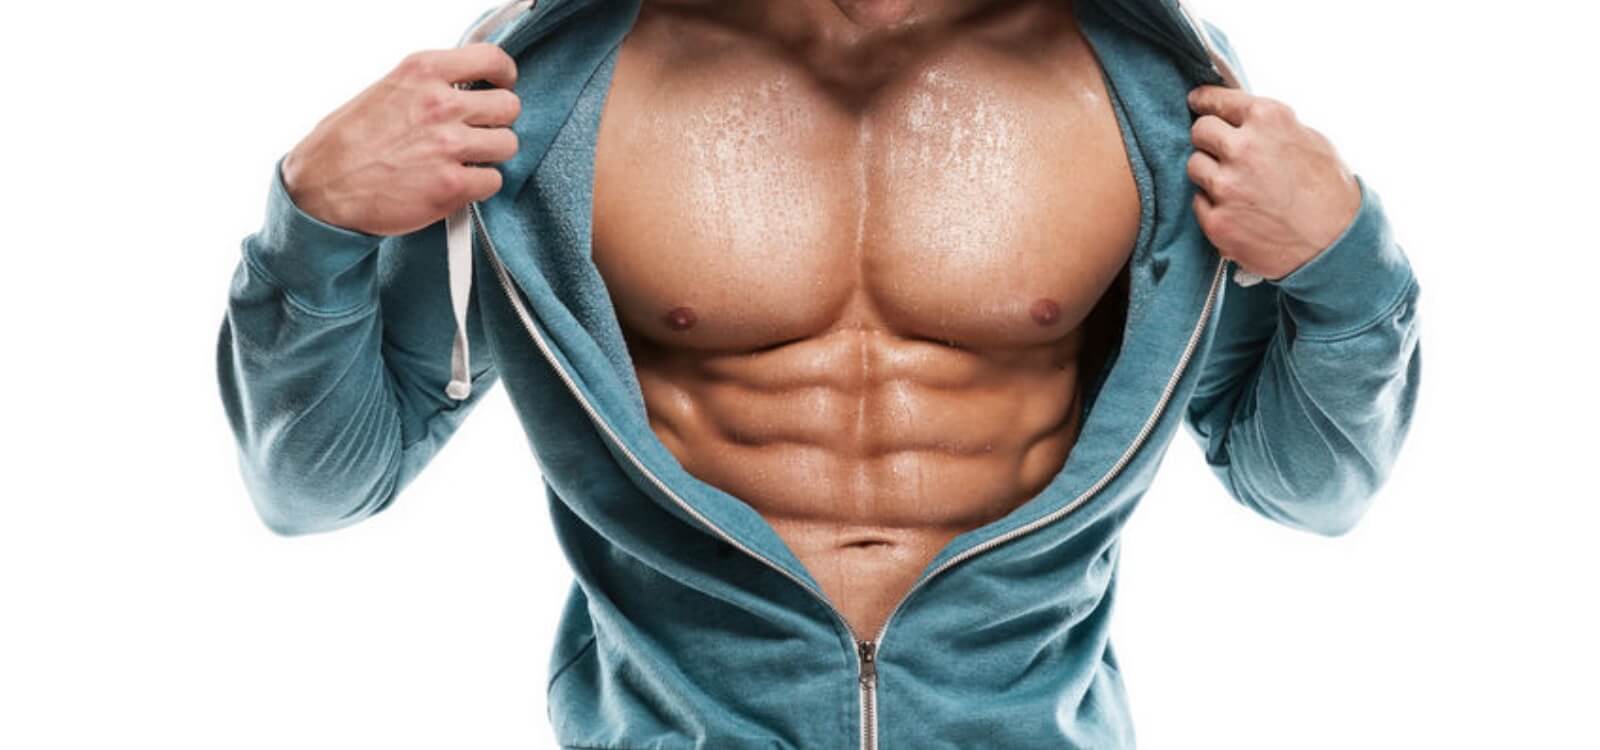 9 Must-try Chest Exercises for Building Muscle